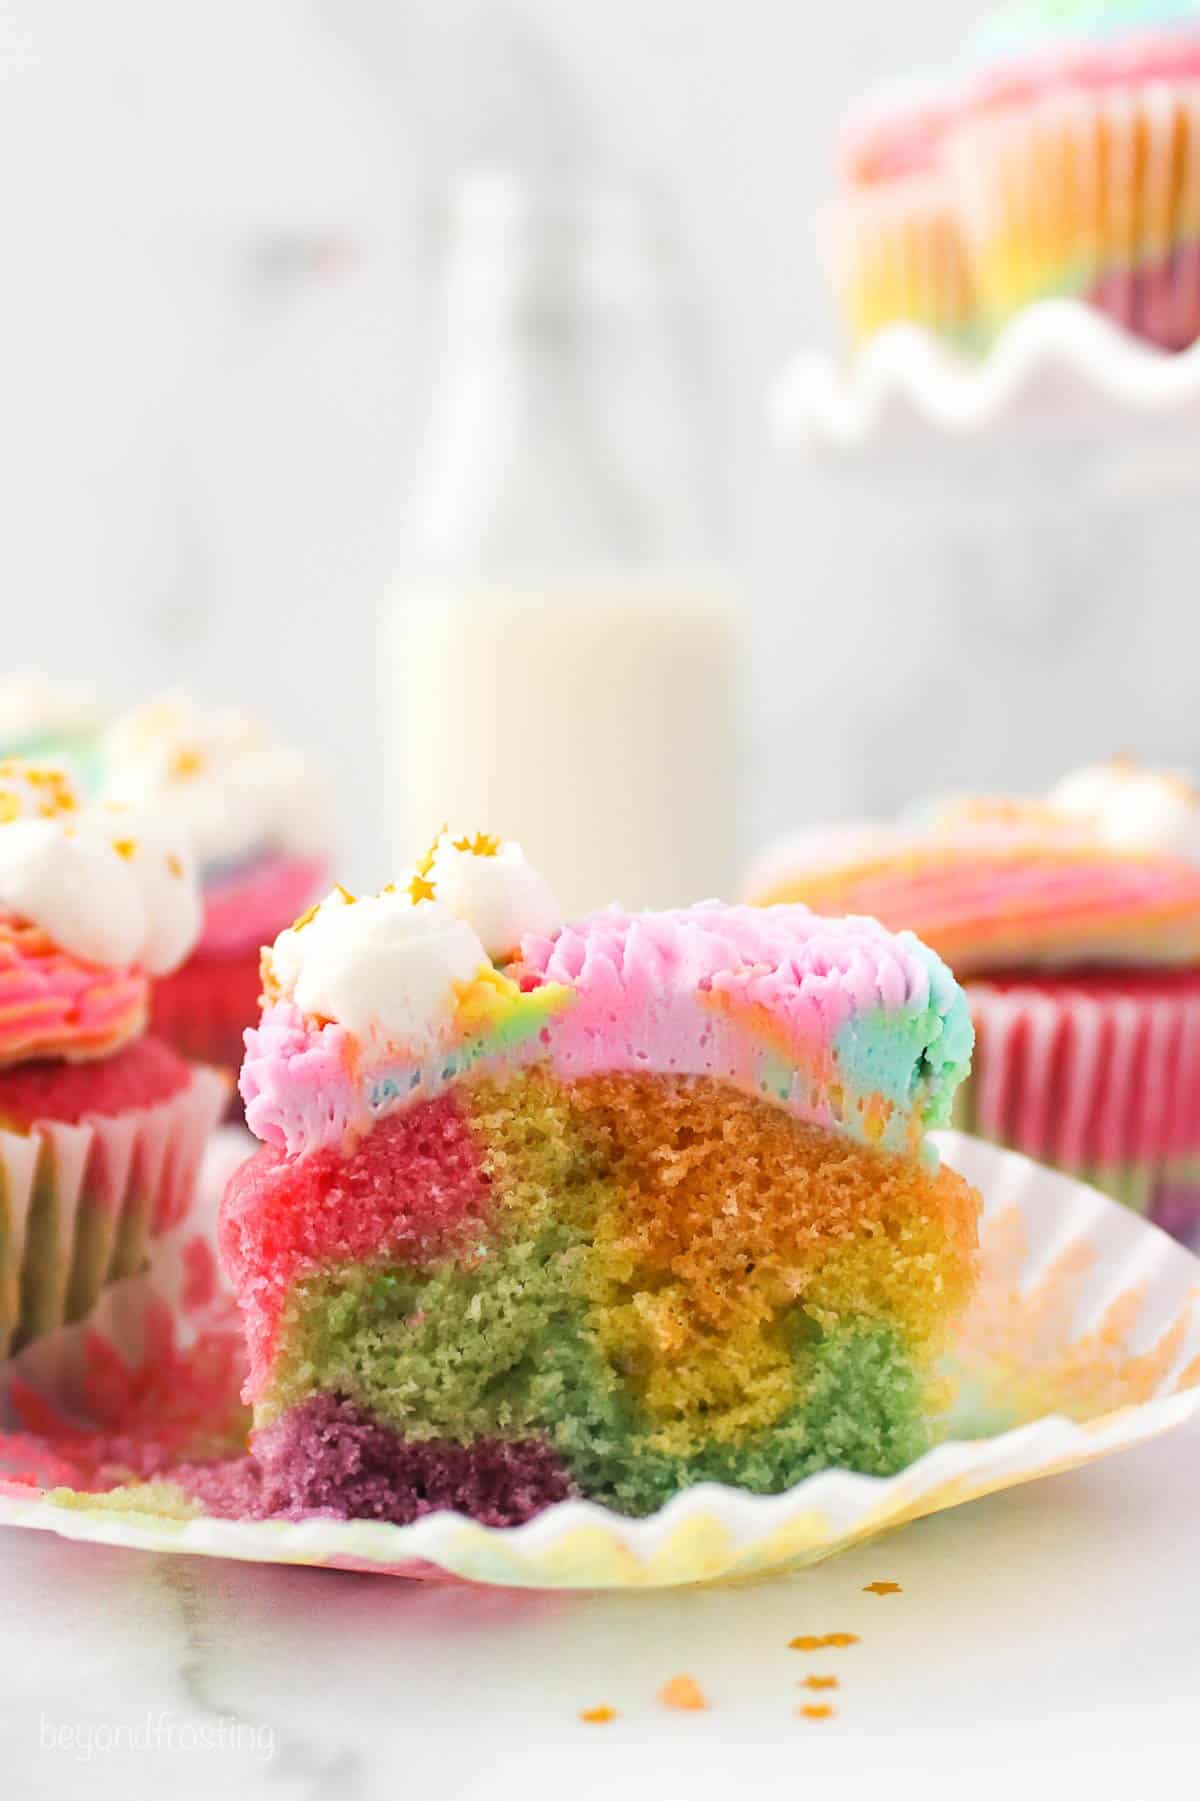 Side view of a rainbow cupcake with rainbow frosting cut in half